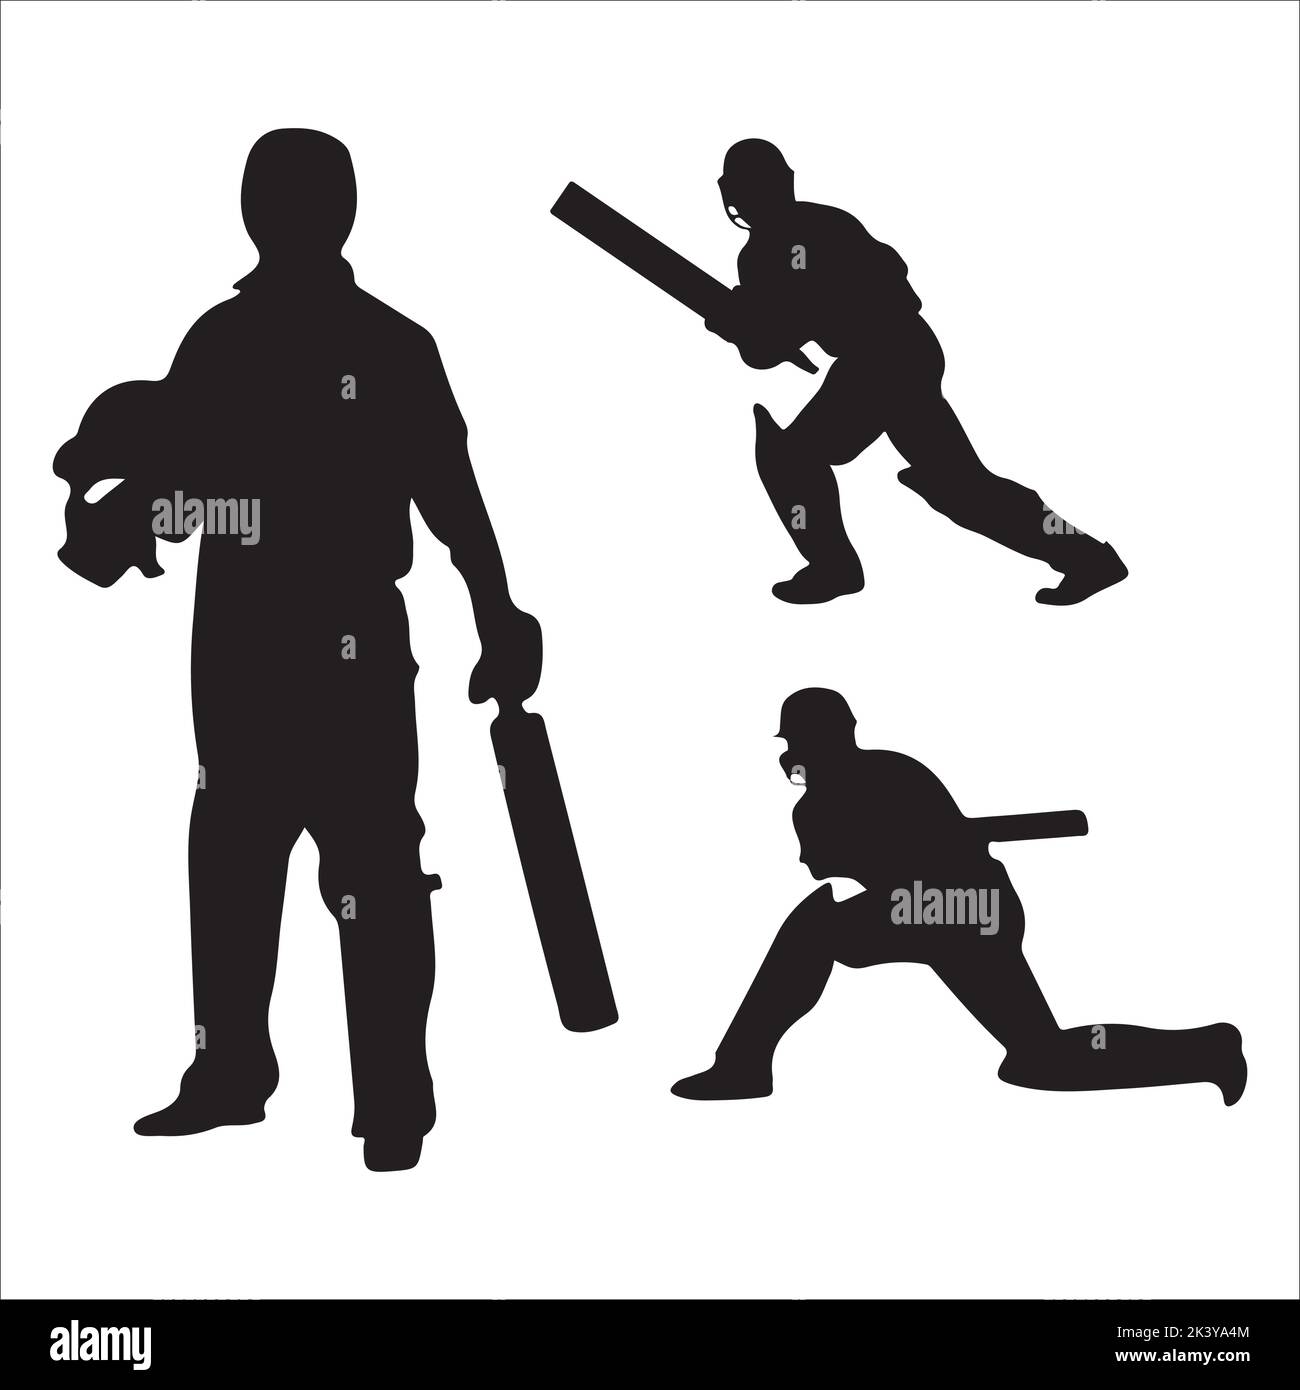 Vector Set Of Cricket Players Silhouettes Illustration Isolated On White Background Stock Vector